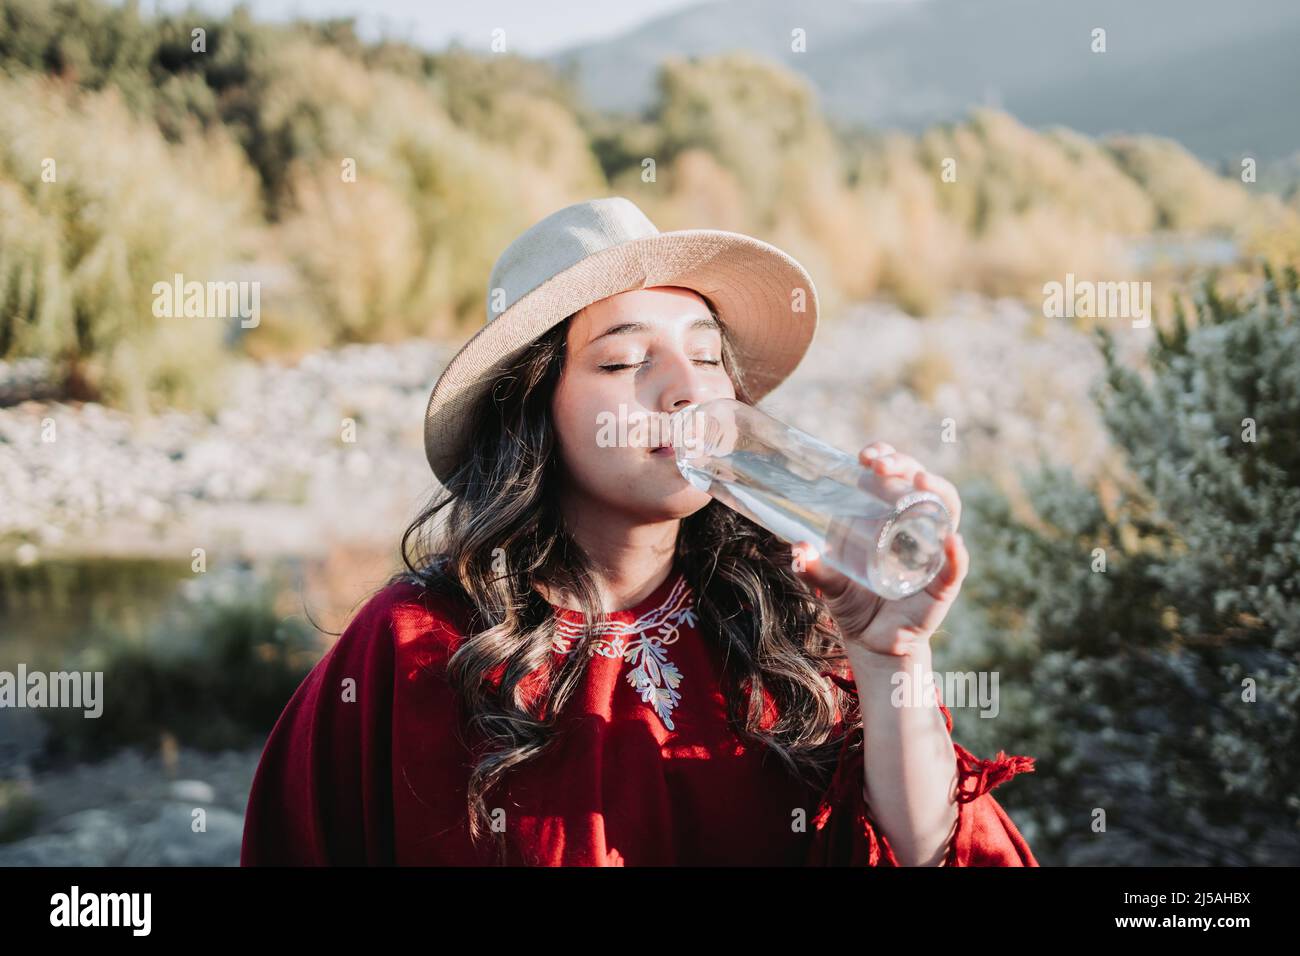 Young latin american woman using traditional clothes, drinking water in a glass bottle. Stock Photo